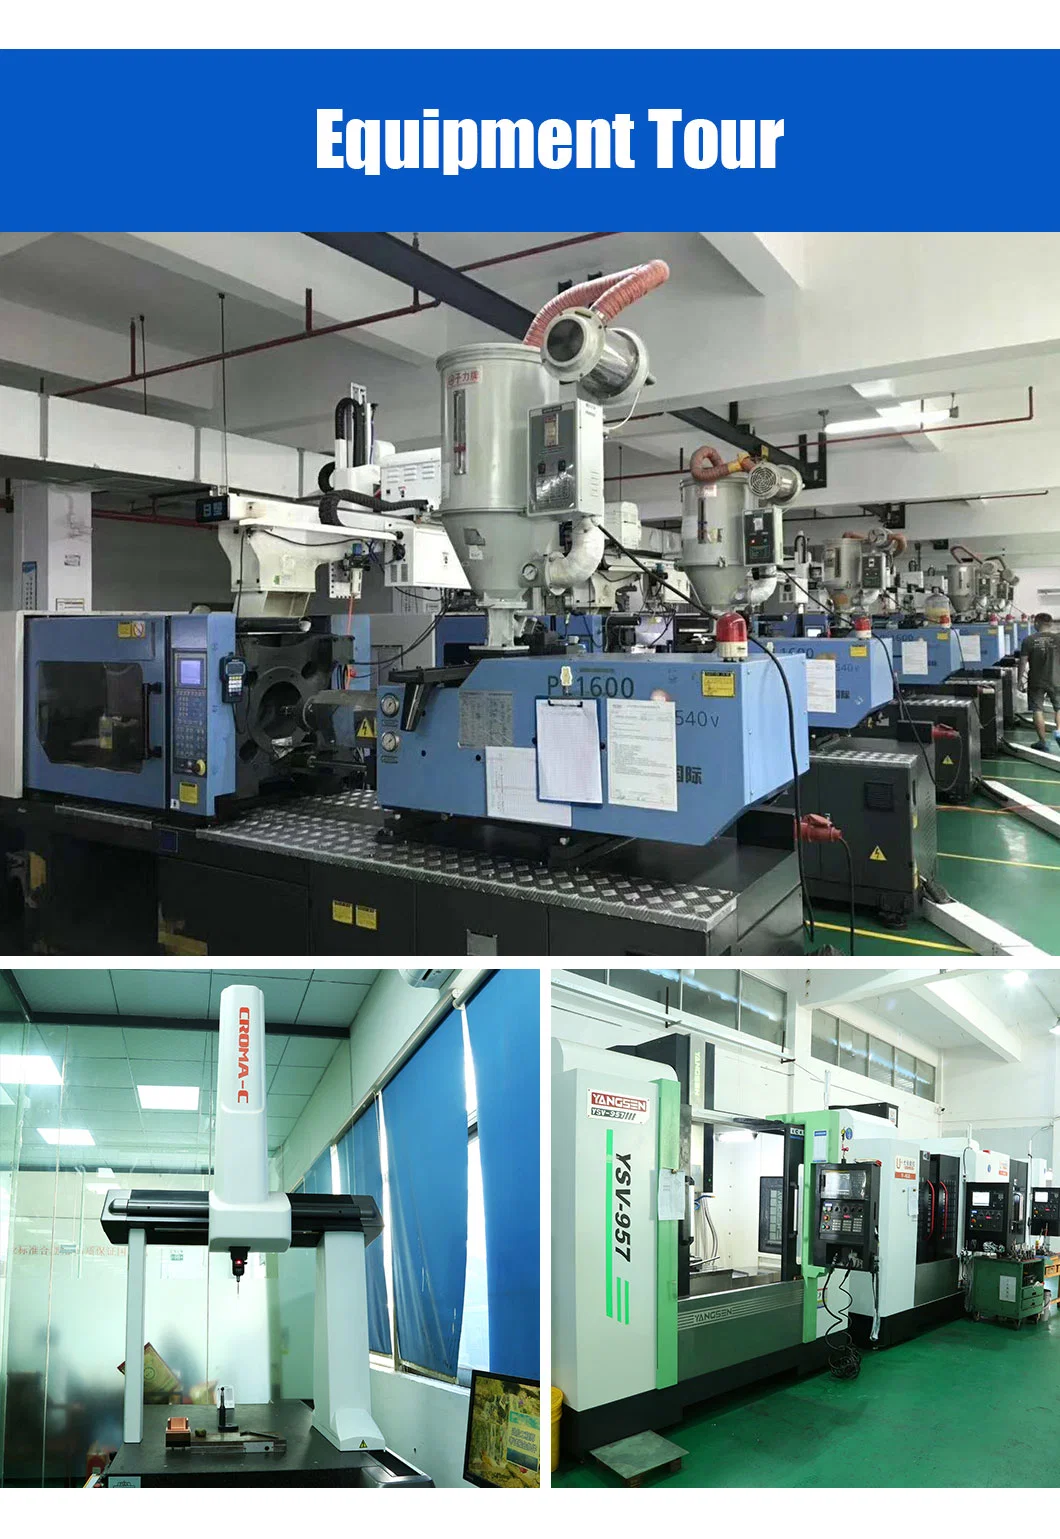 Professional Manufacturer Insert Molding Factory Injection Moulding Plastic Injection Mold